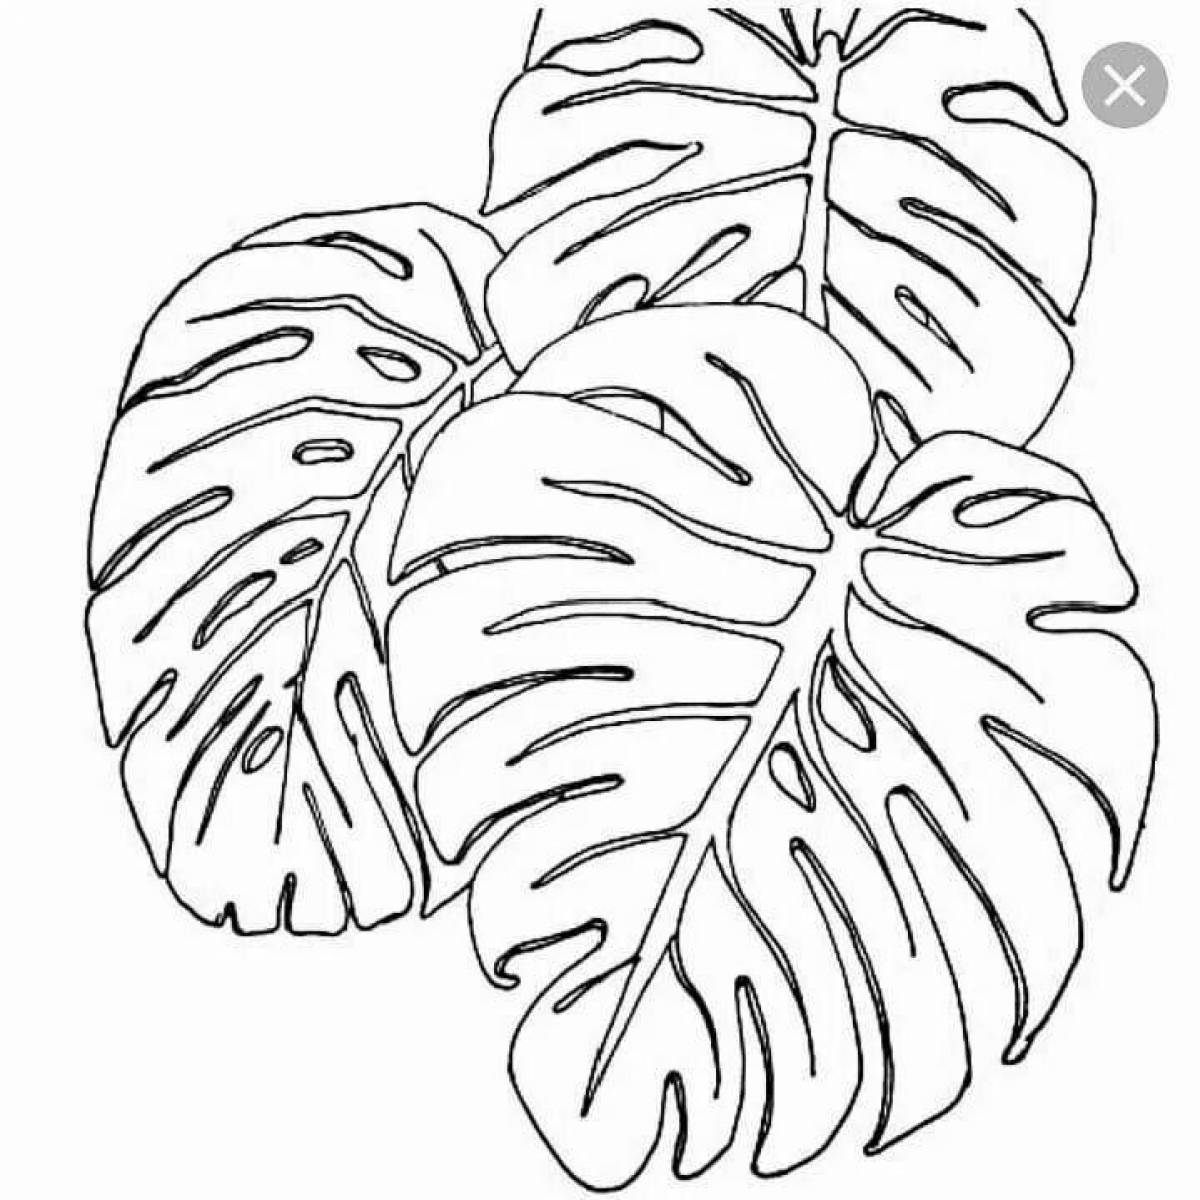 Delightful monstera leaf coloring page